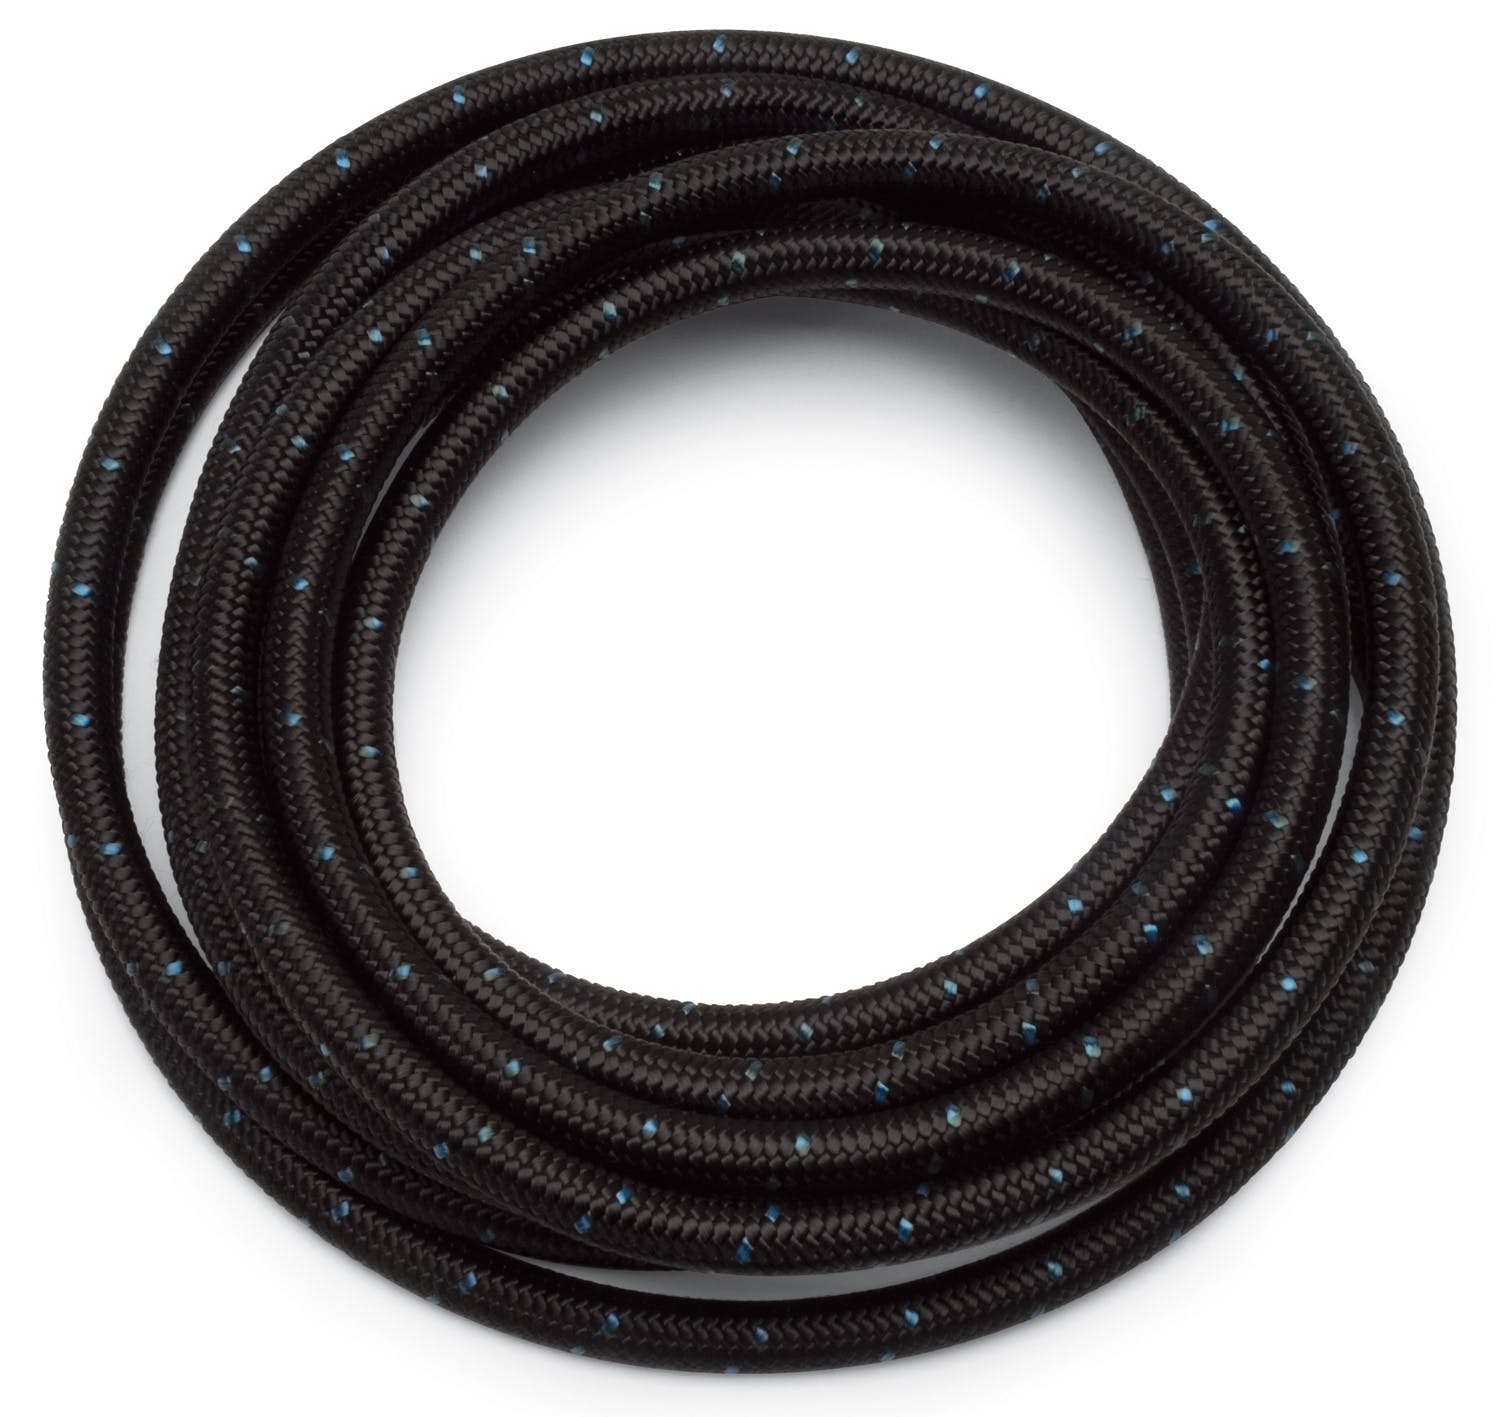 Russell 630253 -4 50 Ft ProClassic Hose